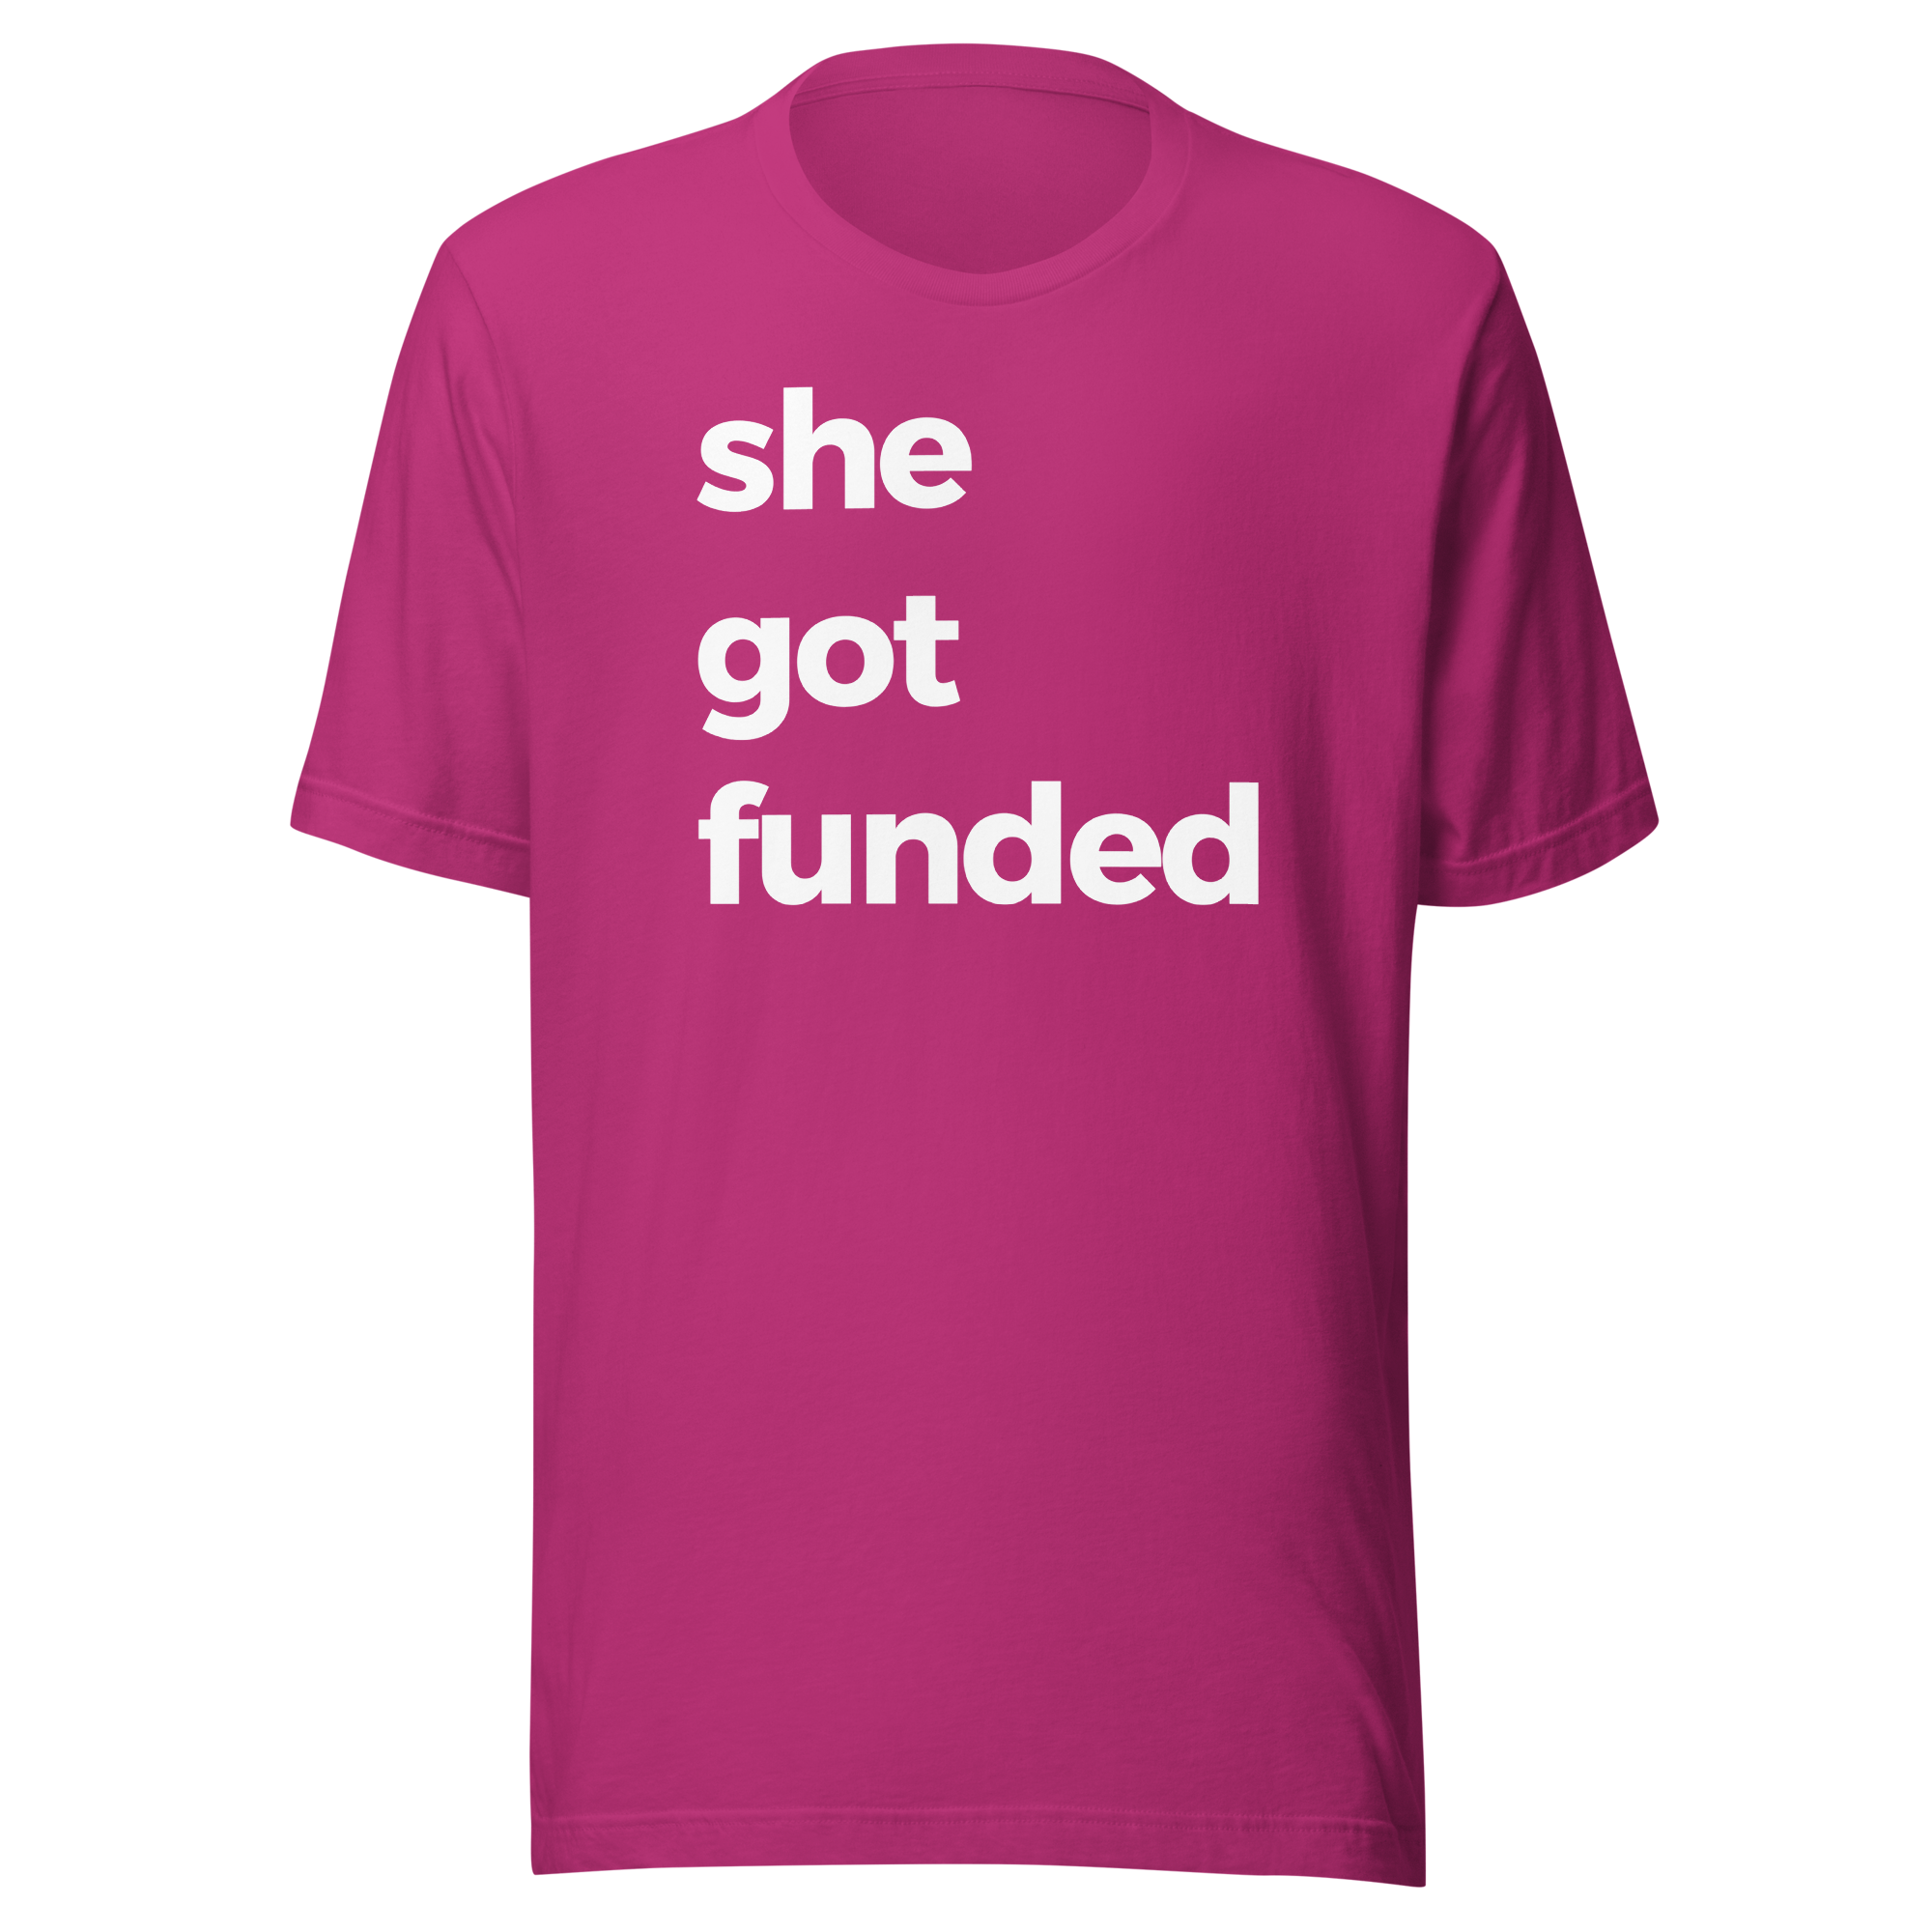 She Got Funded Tee